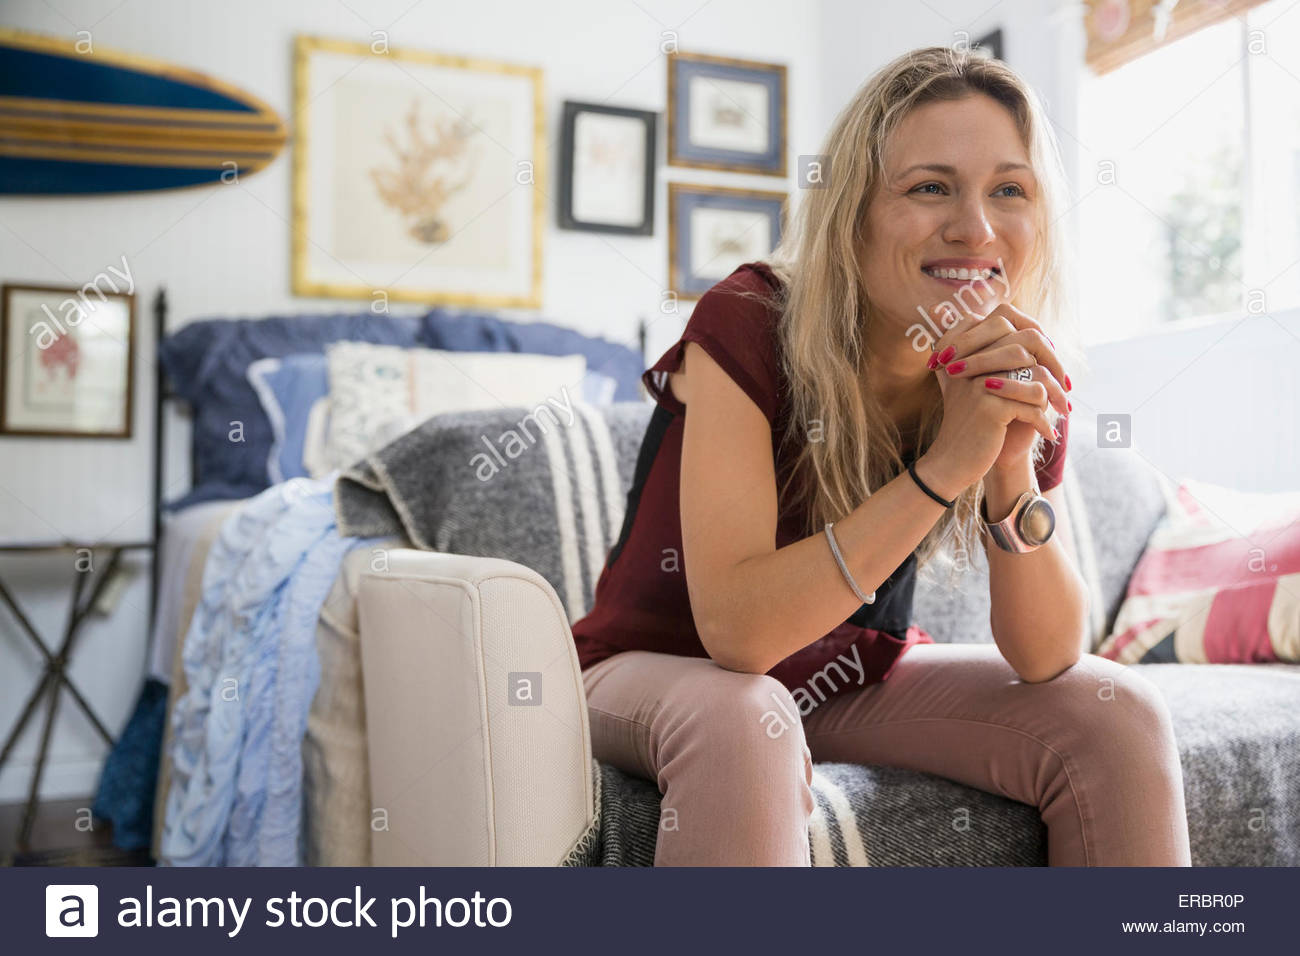 Smiling blonde woman with hands clasped on sofa Stock Photo